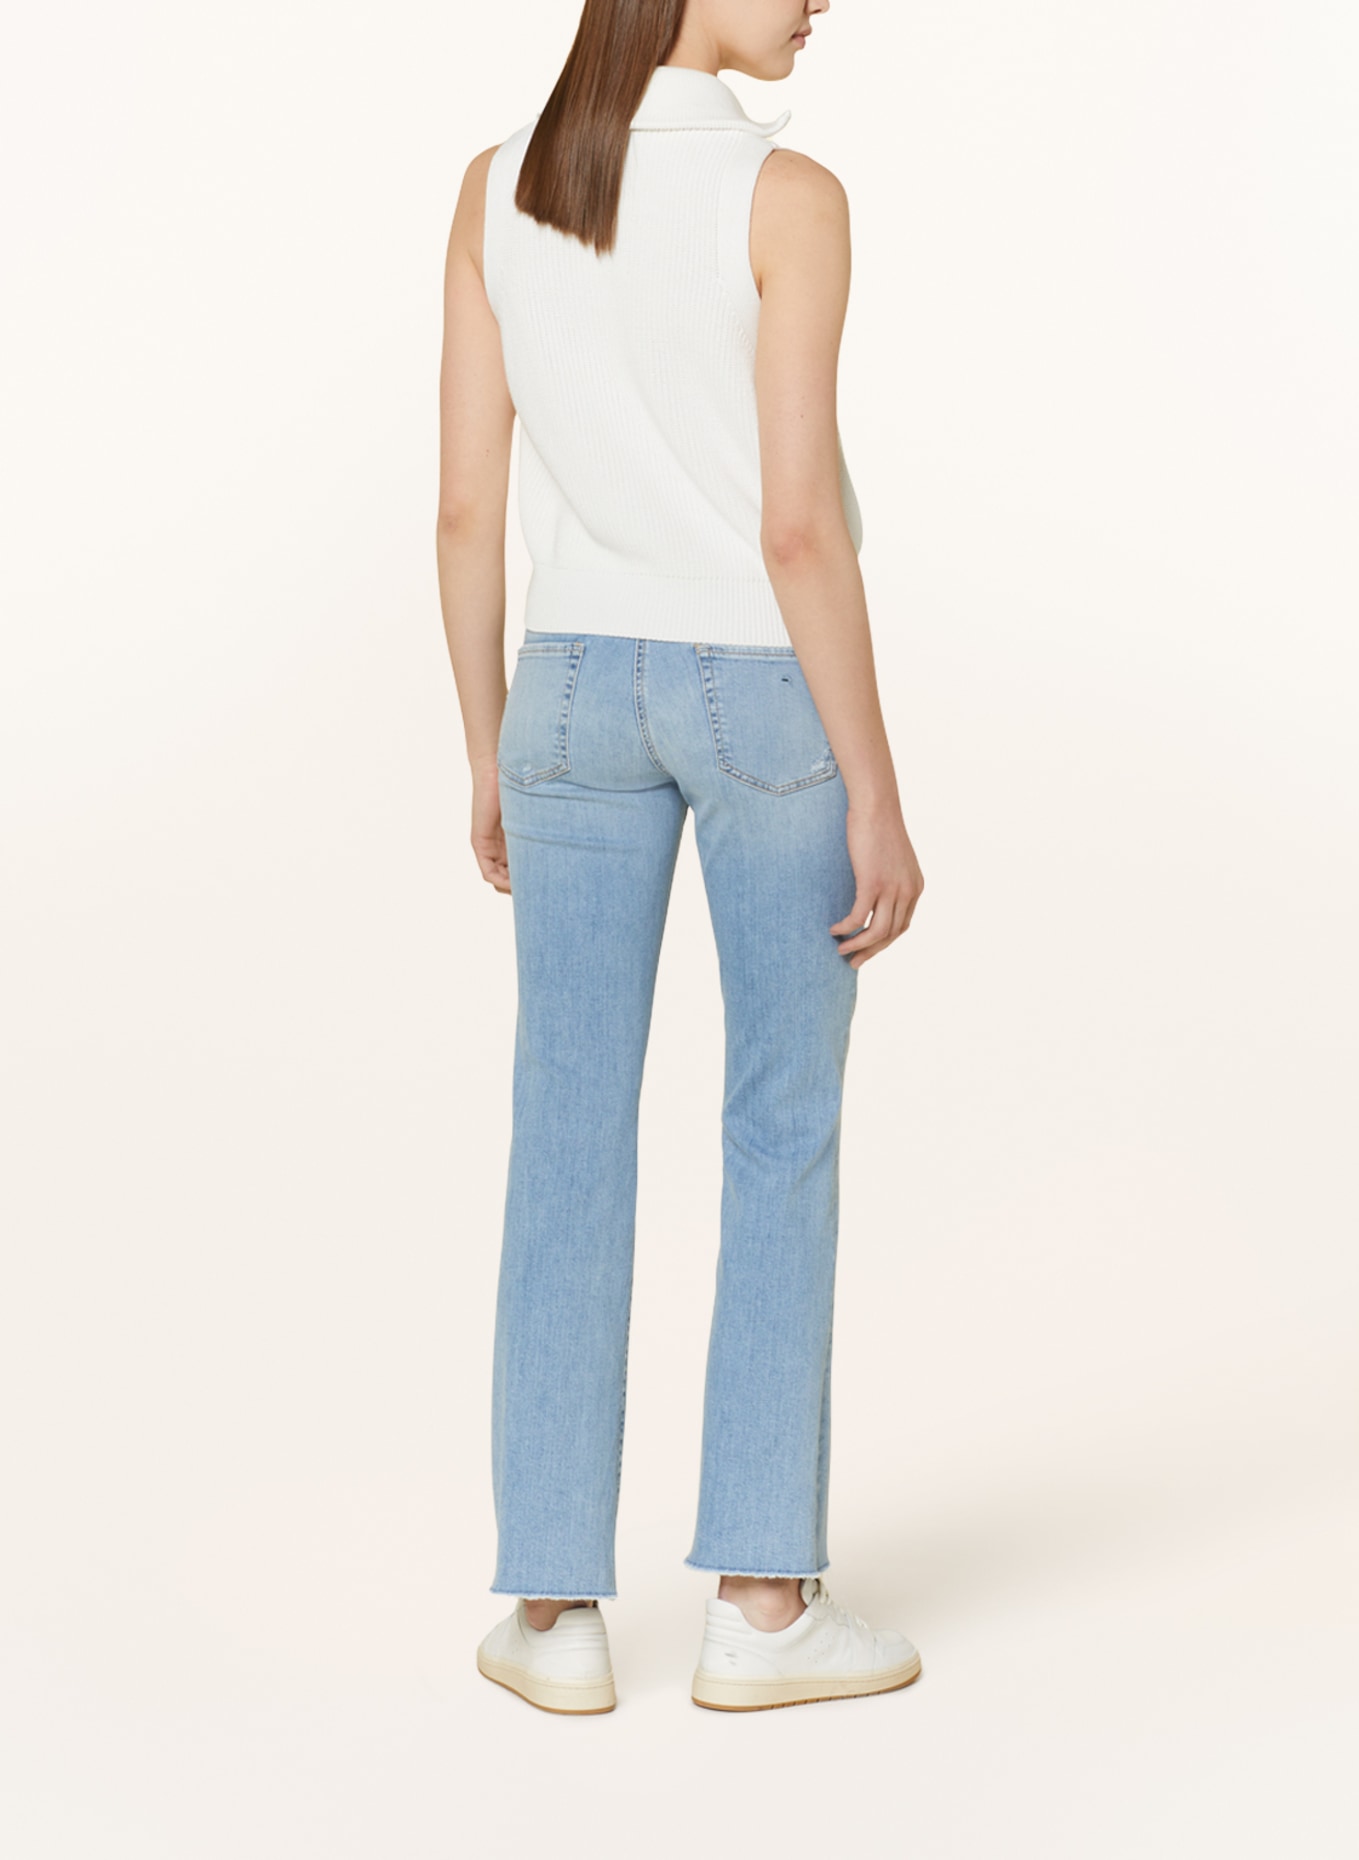 CAMBIO Flared jeans PARIS, Color: 5170 summer well worn fringed (Image 3)